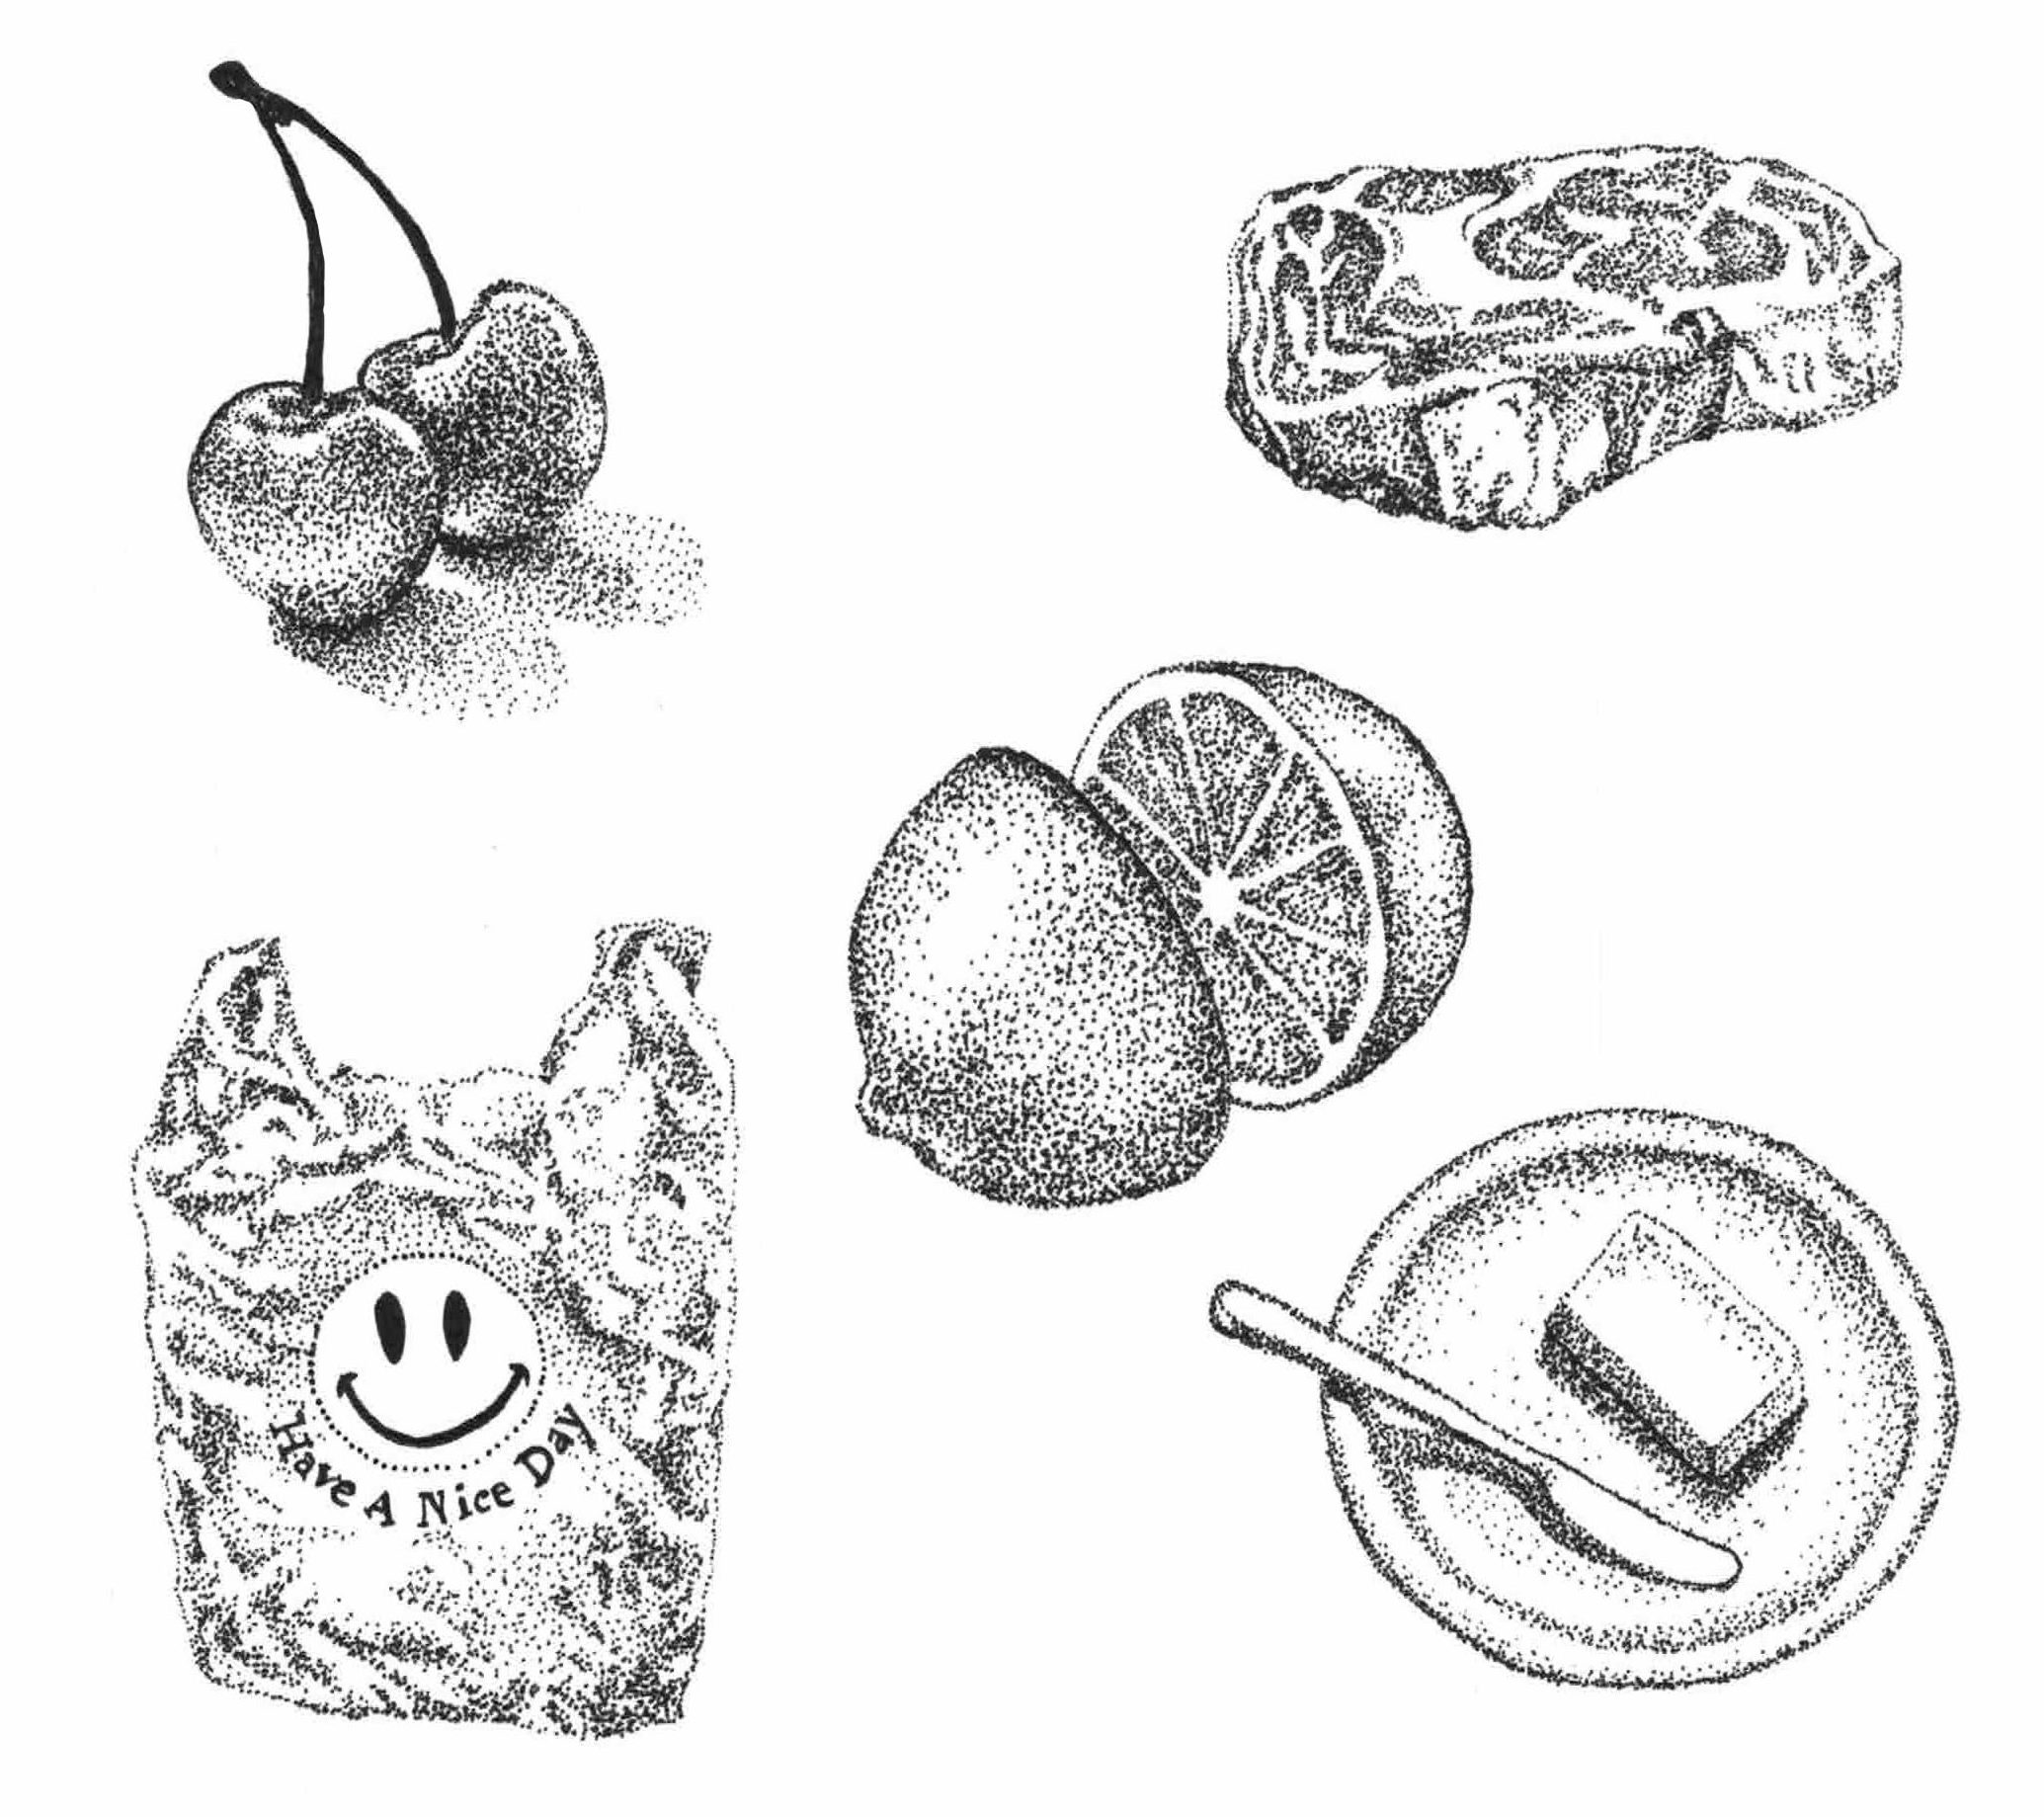 A collection of five black and white tattoo sketches drawn using small dots instead of lines. Two cherries connected by their stems sit in the top right corner with shading suggesting they are sitting on a surface. A thick slab of heavily marbled steak laying horizontally is in the top left corner. An orange cut down the center with each half facing the other sits in the center. A crinkled plastic grocery bag with a round smiley face and the phrase "Have A Nice Day" printed along the bottom curve of the face sits upright in the bottom left corner. A round plate with a rectangular chunk of butter and a butter knife sitting on the plate are located in the bottom right corner. 